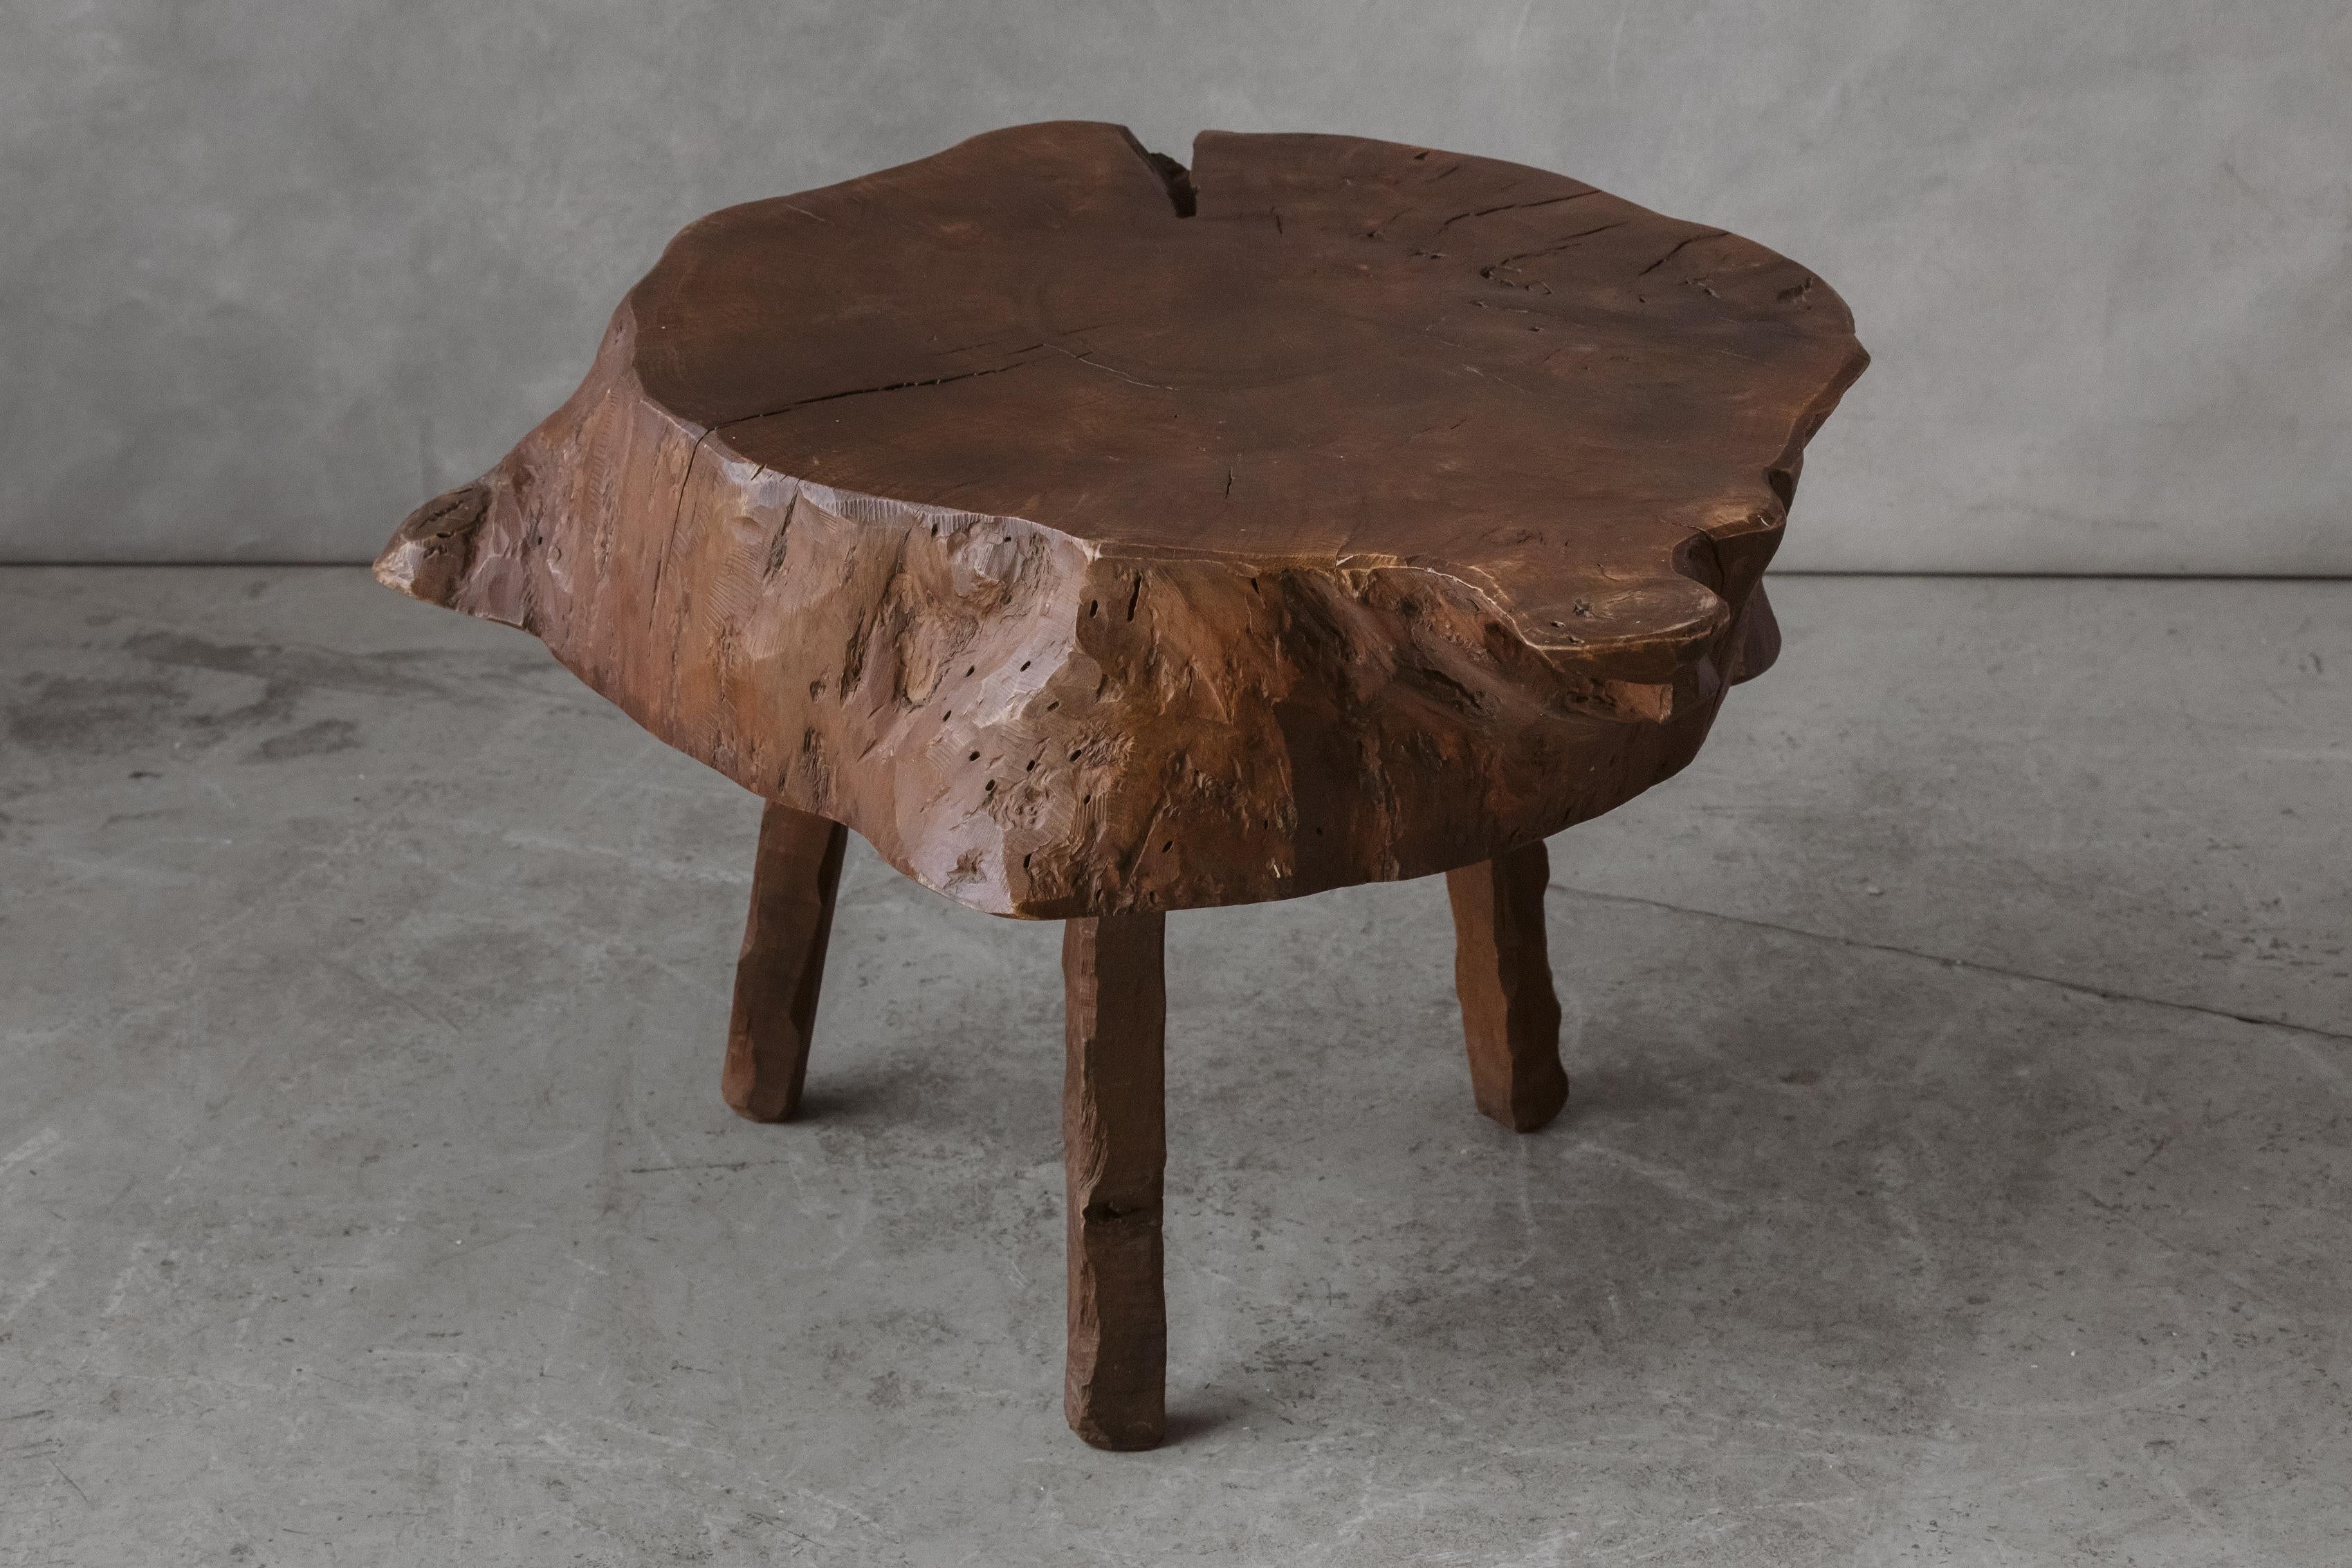 Vintage Live Edge Coffee Table From France, circa 1960.

We prefer to speak directly with our clients. So, If you have any questions or would like to know more please give us a call or drop us a line. We would love to chat with you.